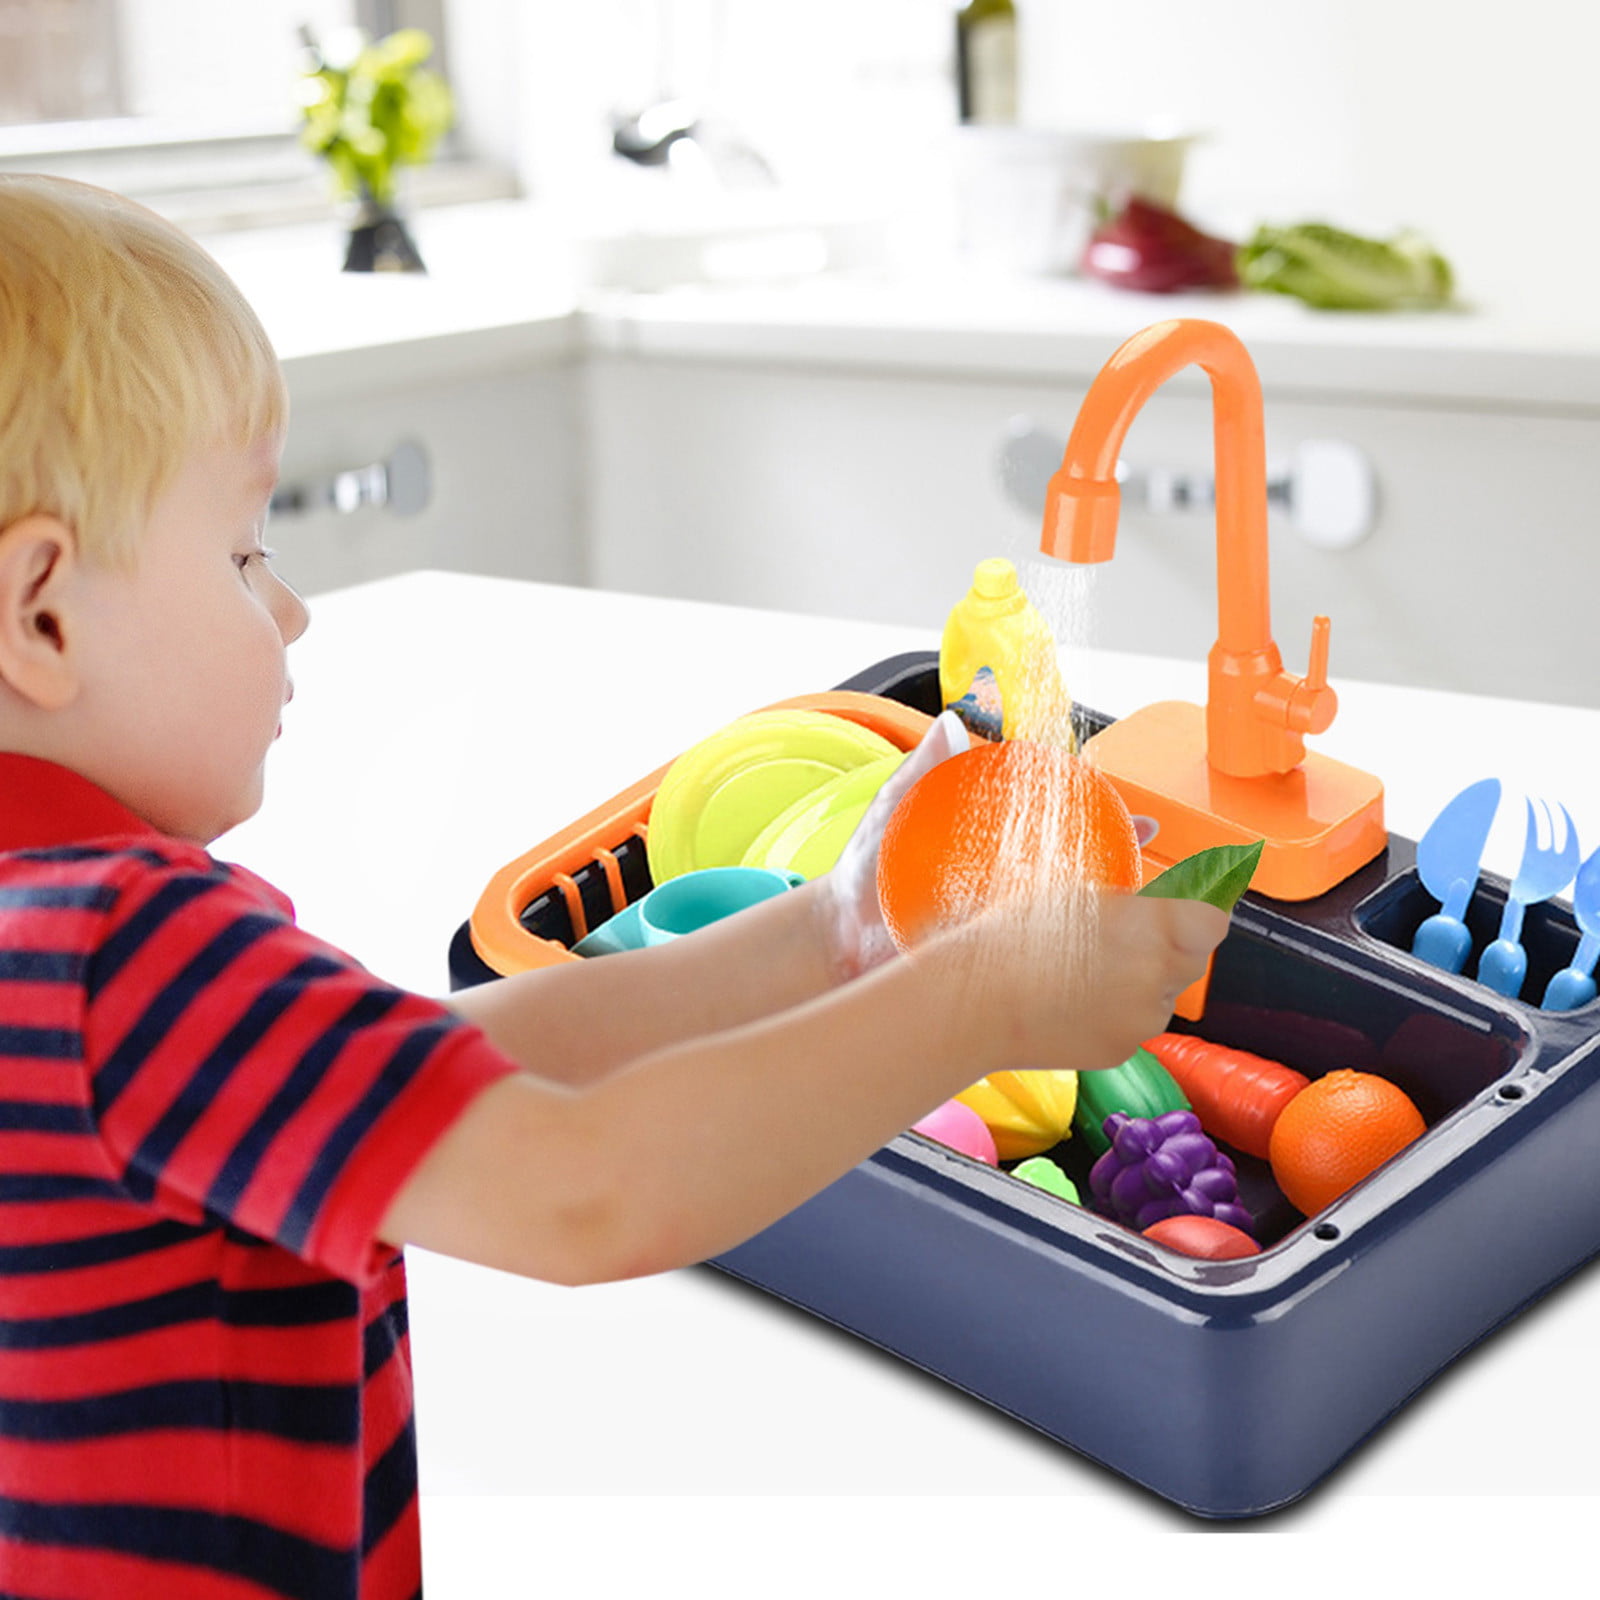 10 Kids TOYS And Gadgets For Under $10 